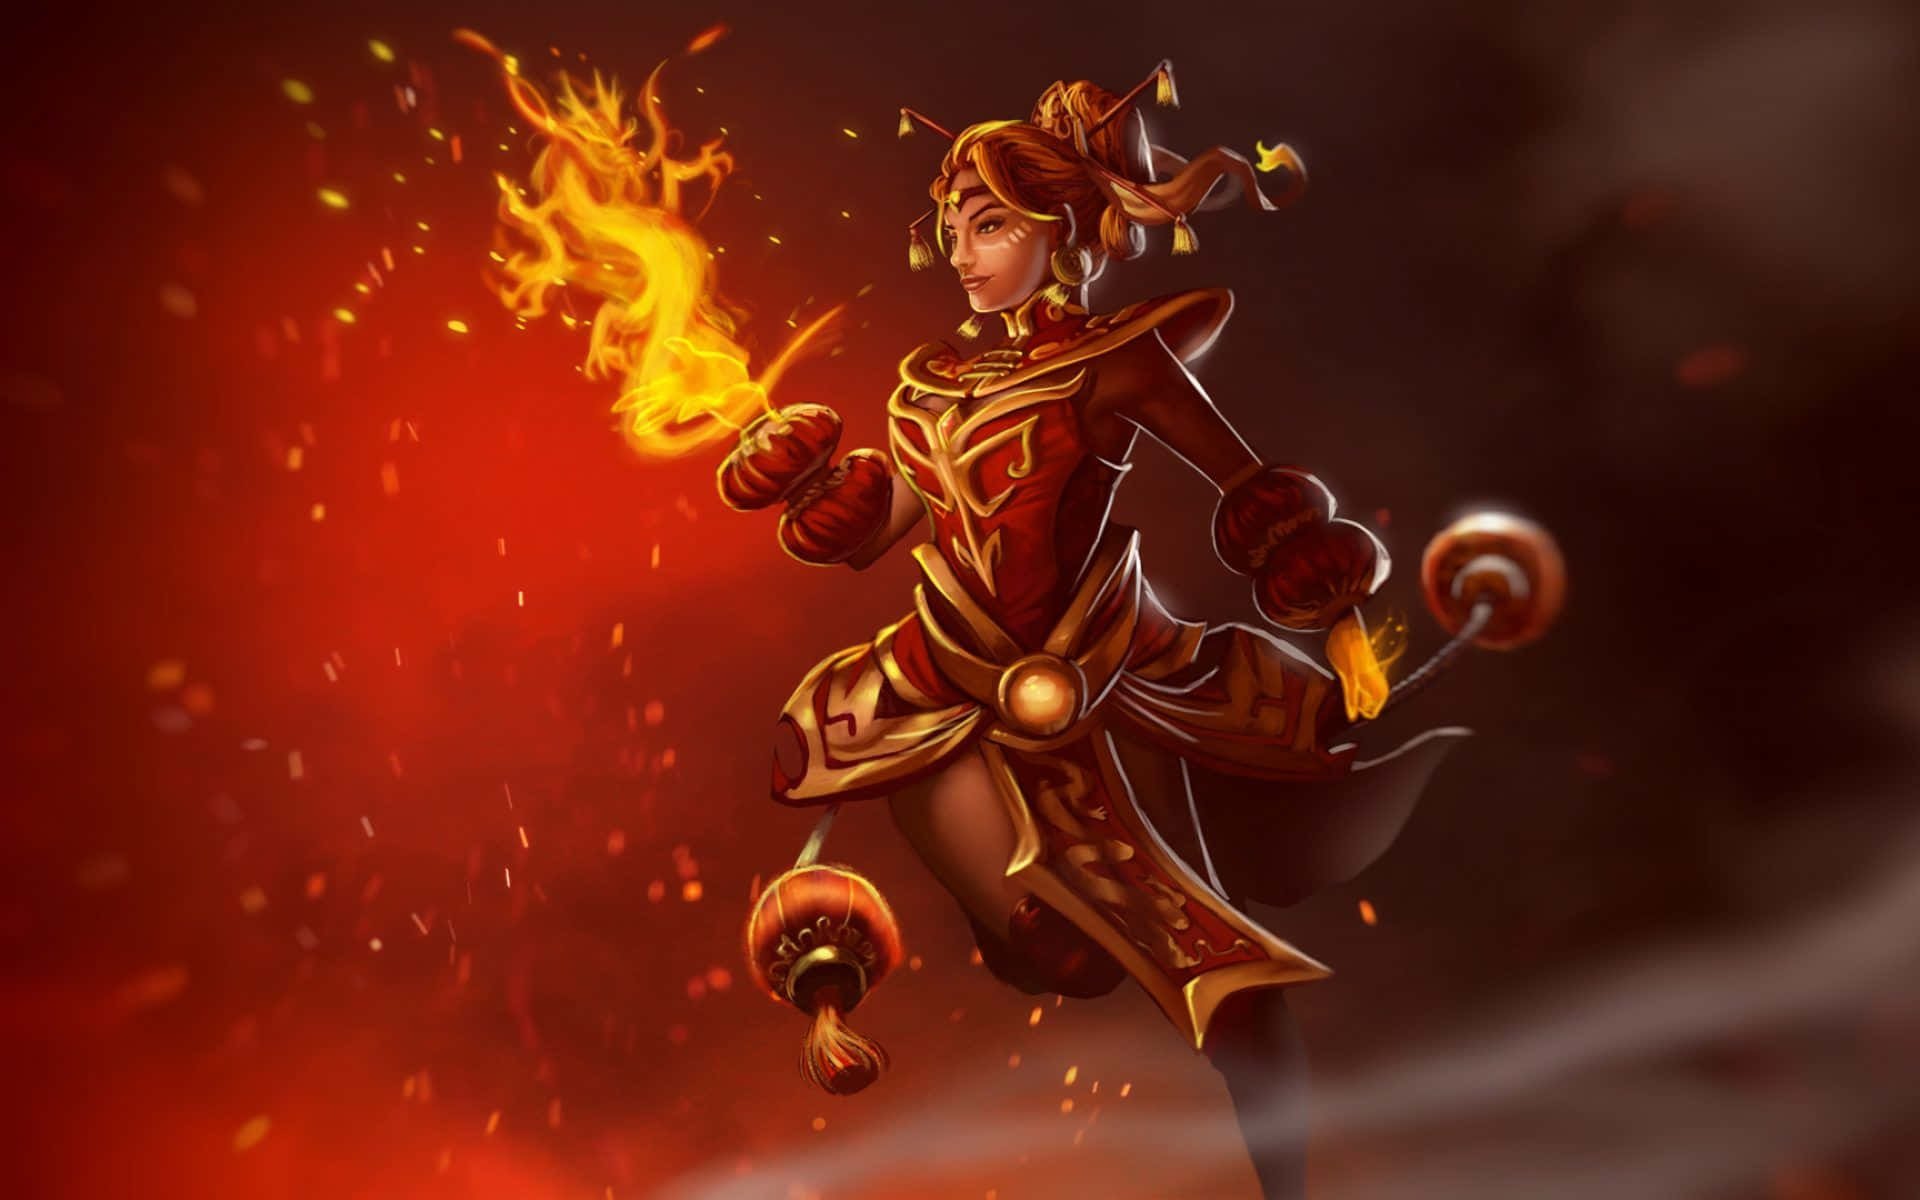 Lina, the fiery sorceress of Dota 2 in action, unleashing her powerful spells on the battlefield. Wallpaper